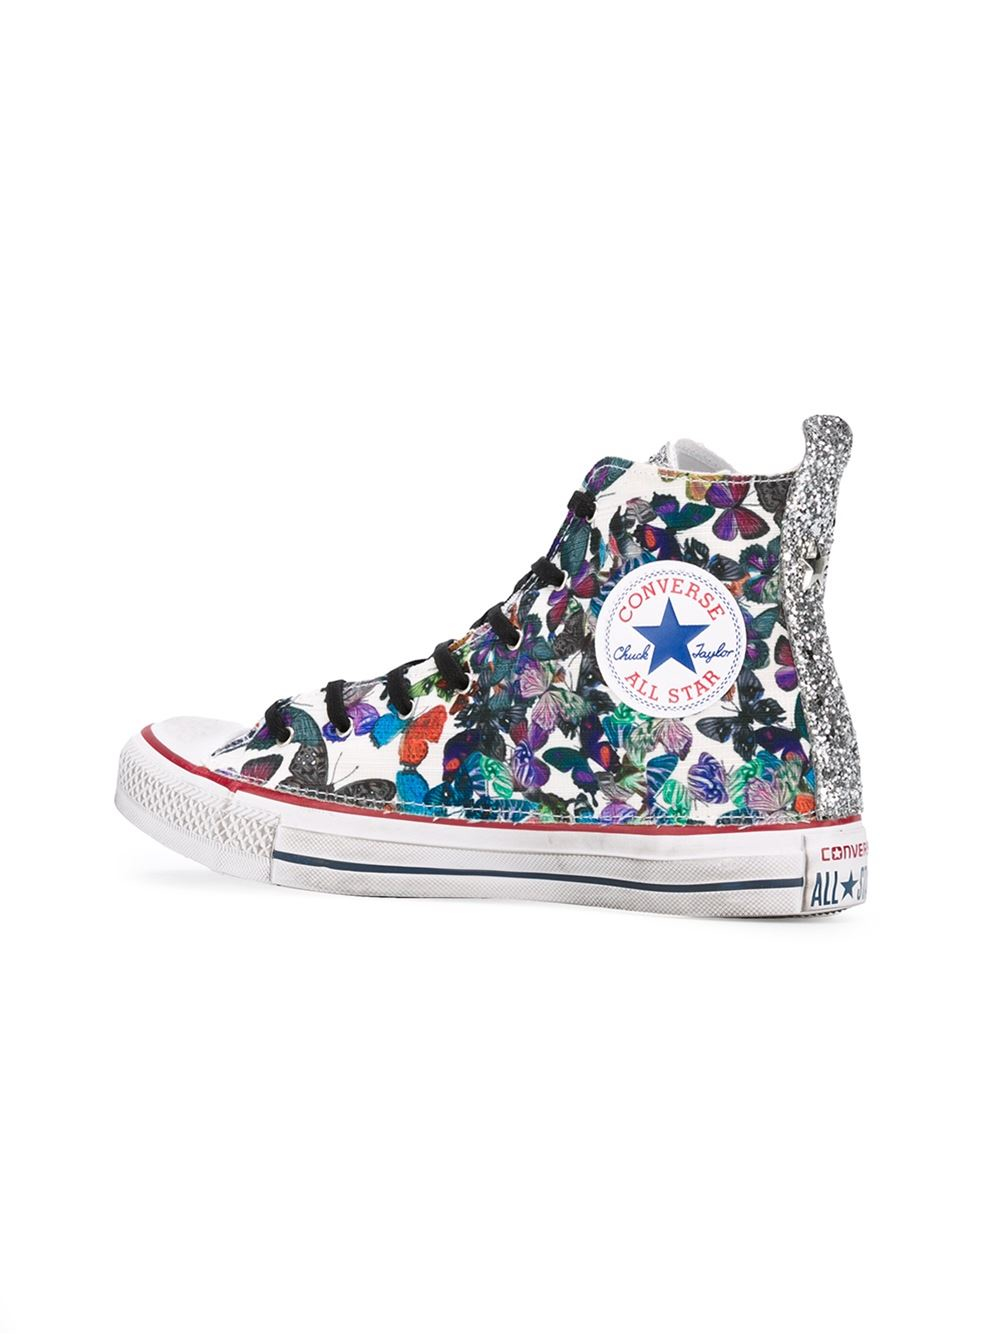 Converse Butterfly High Top Sneakers in White - Lyst